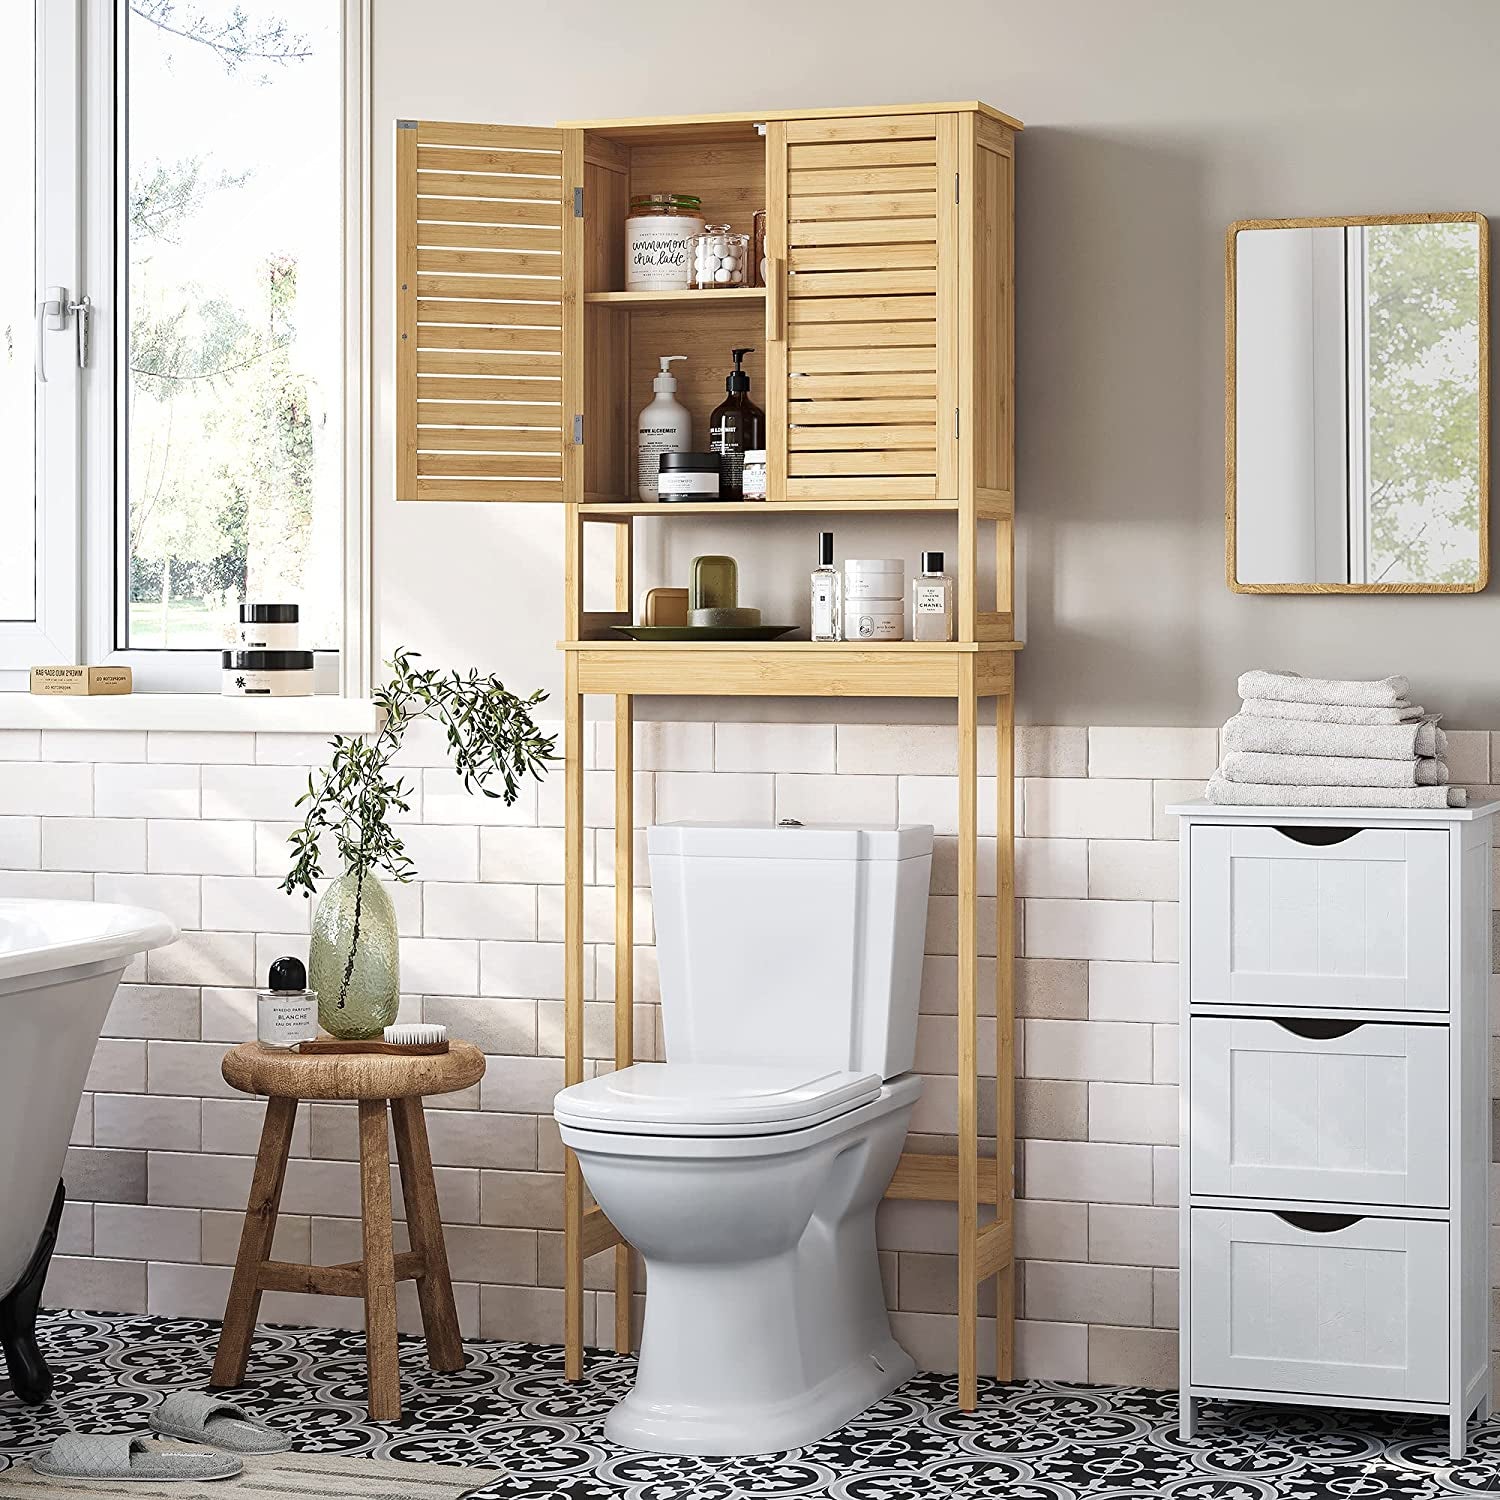 35 Items You Need For A Cute *And* Organized Bathroom